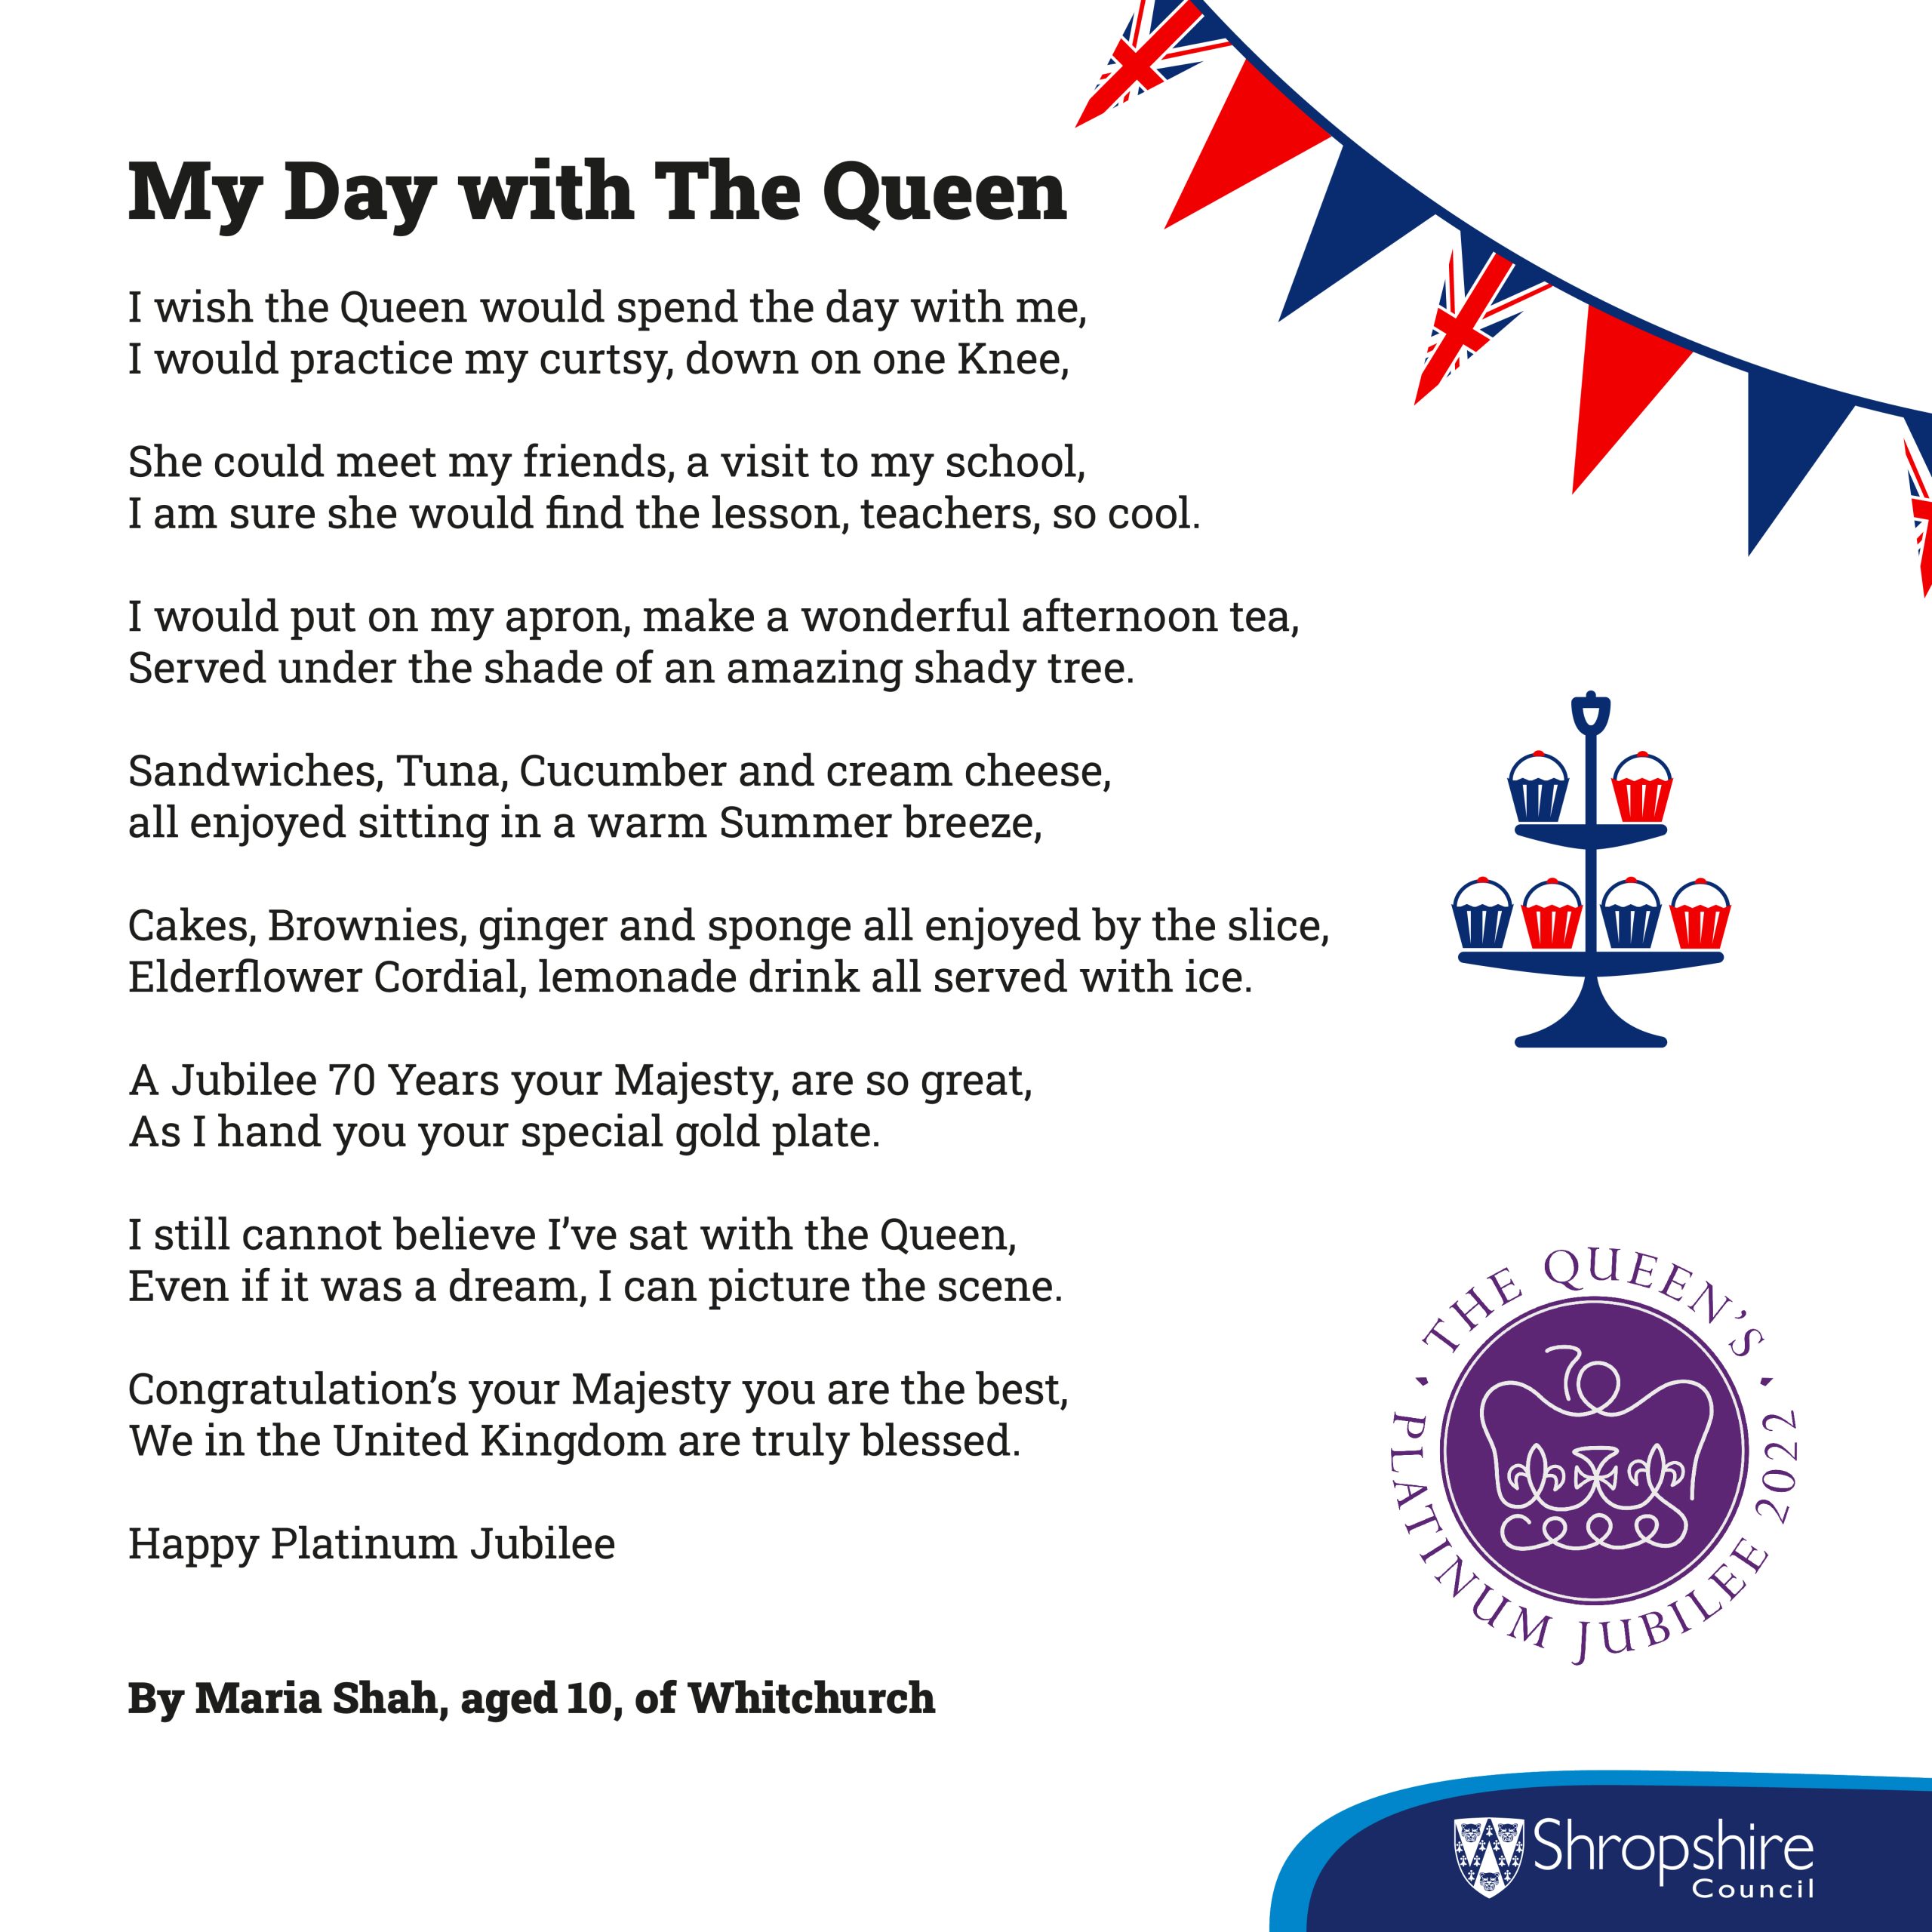 "My Day with The Queen" by Maria Shah poem